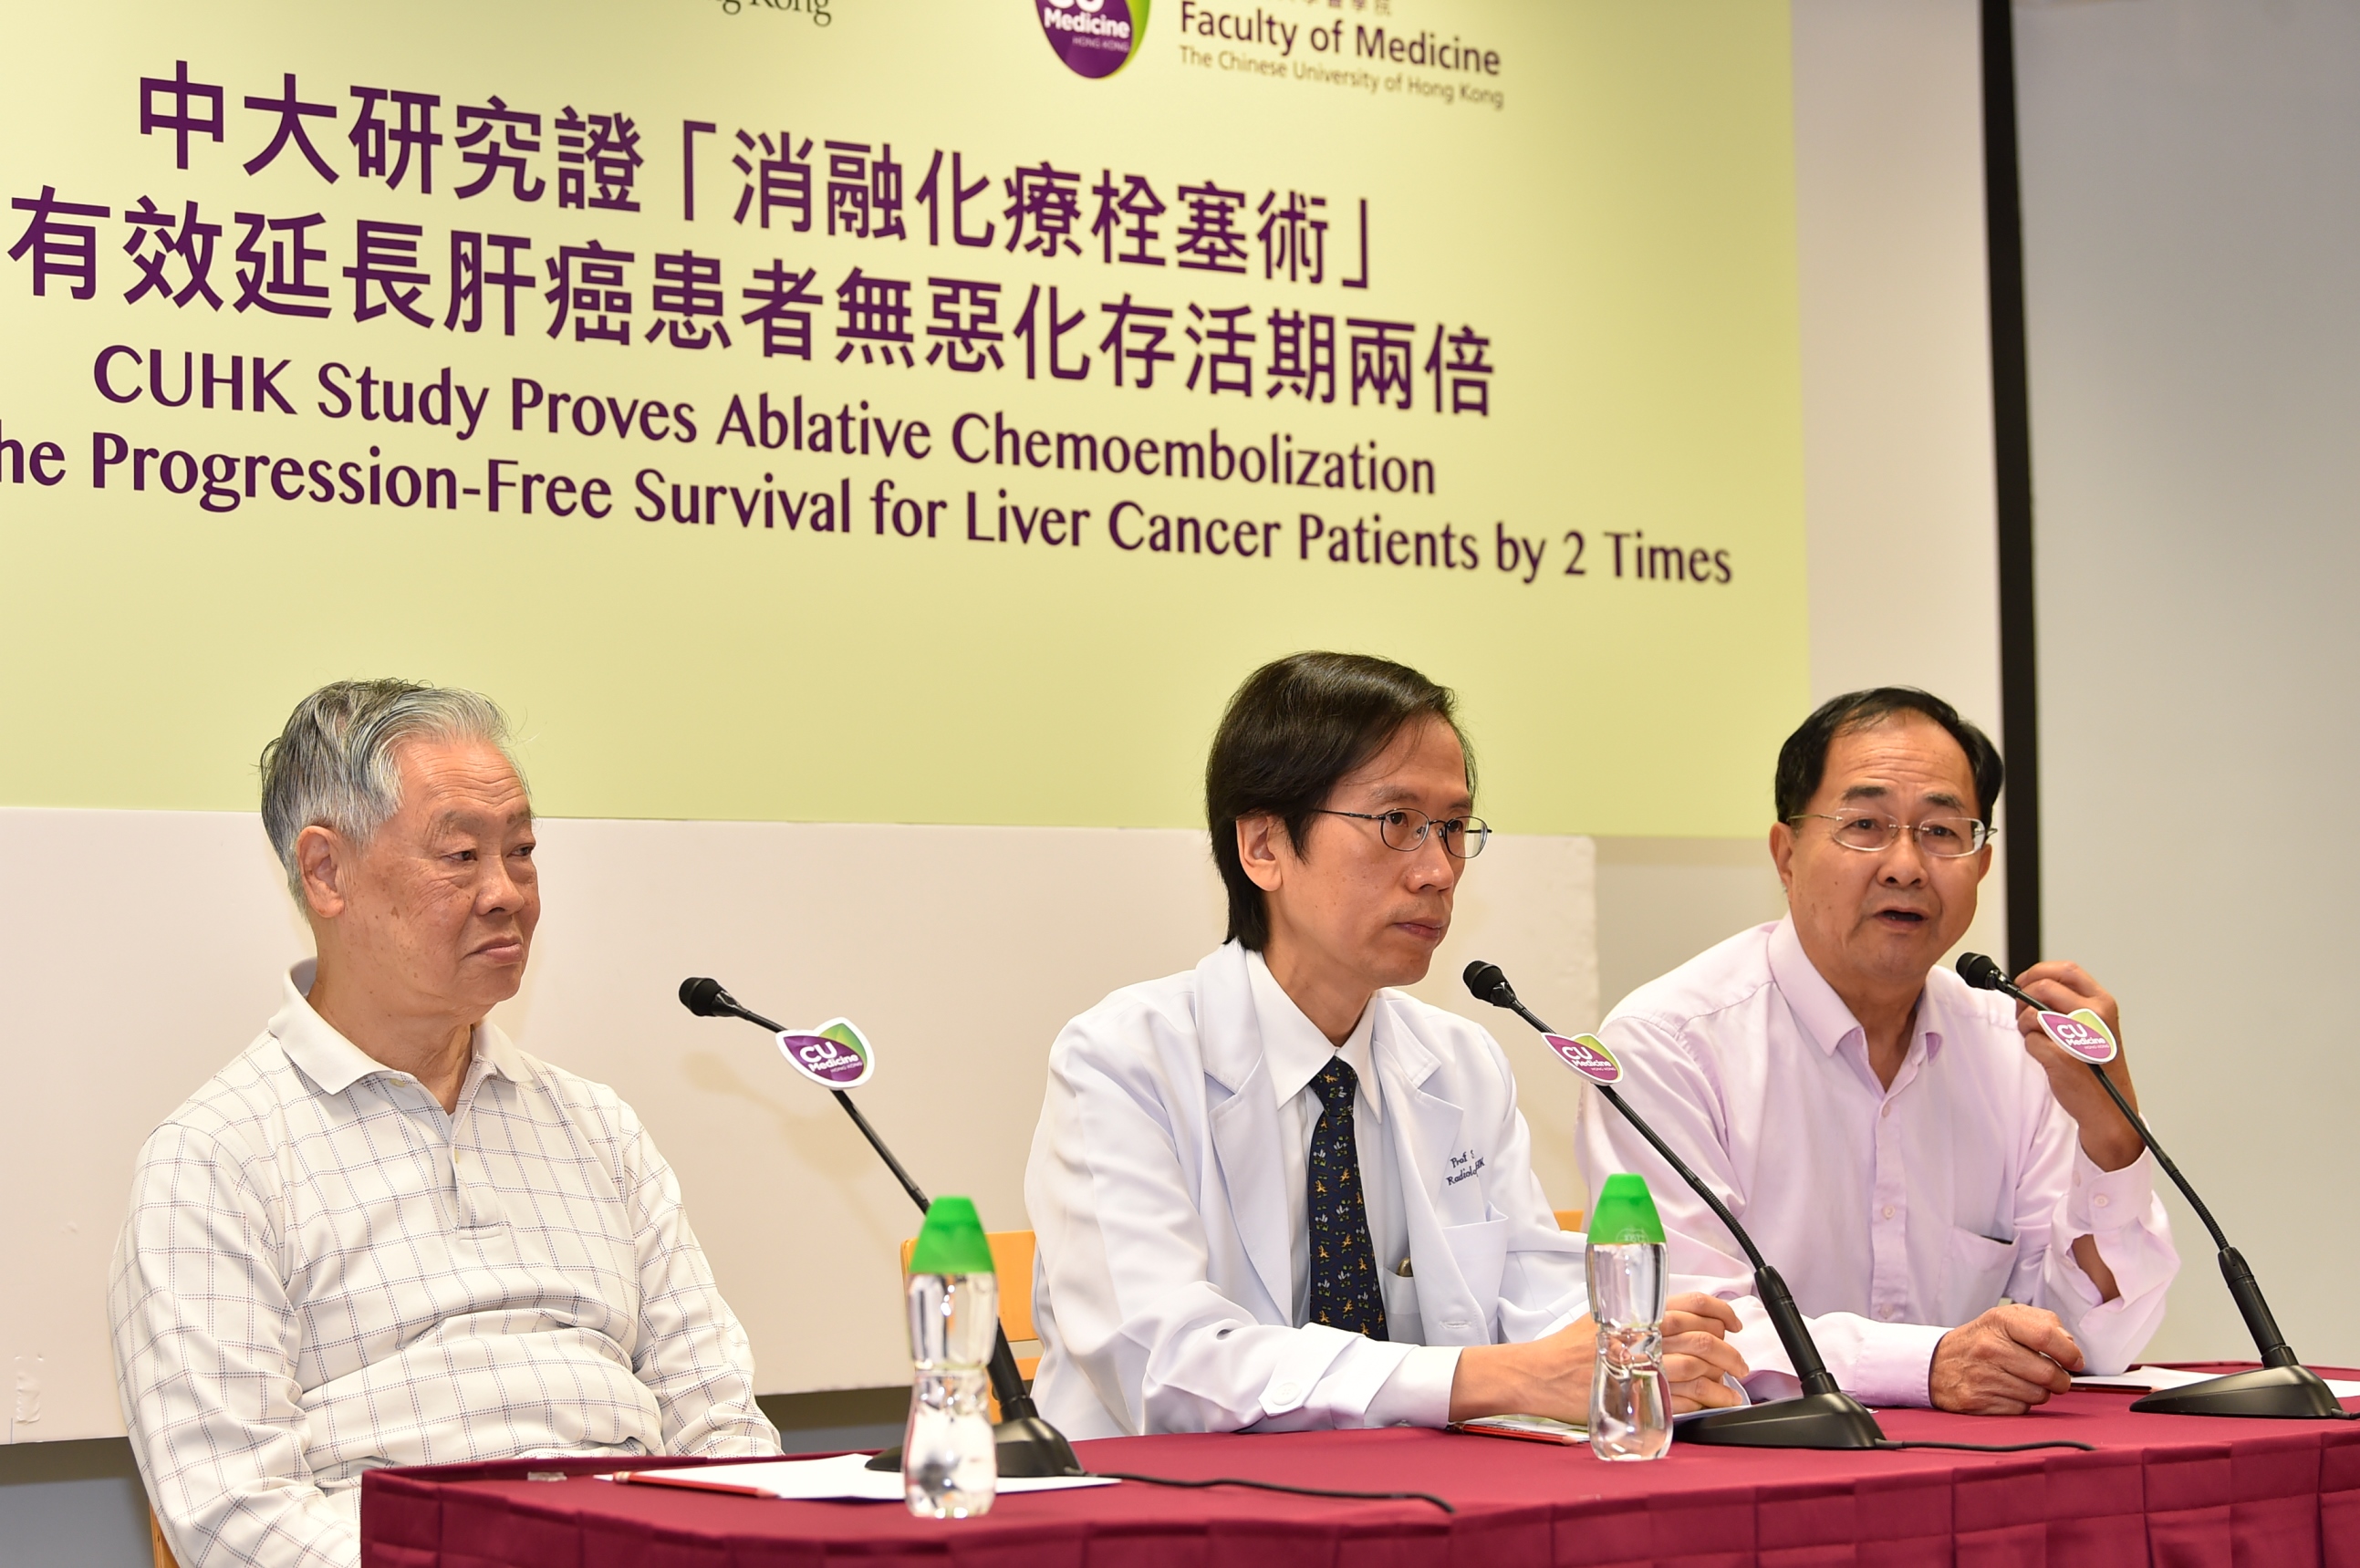 Mr YEUNG (right) and Mr WONG (left) both received Ablative Chemoembolization four years ago to kill the tumours in their livers. Both of them are in good conditions. 